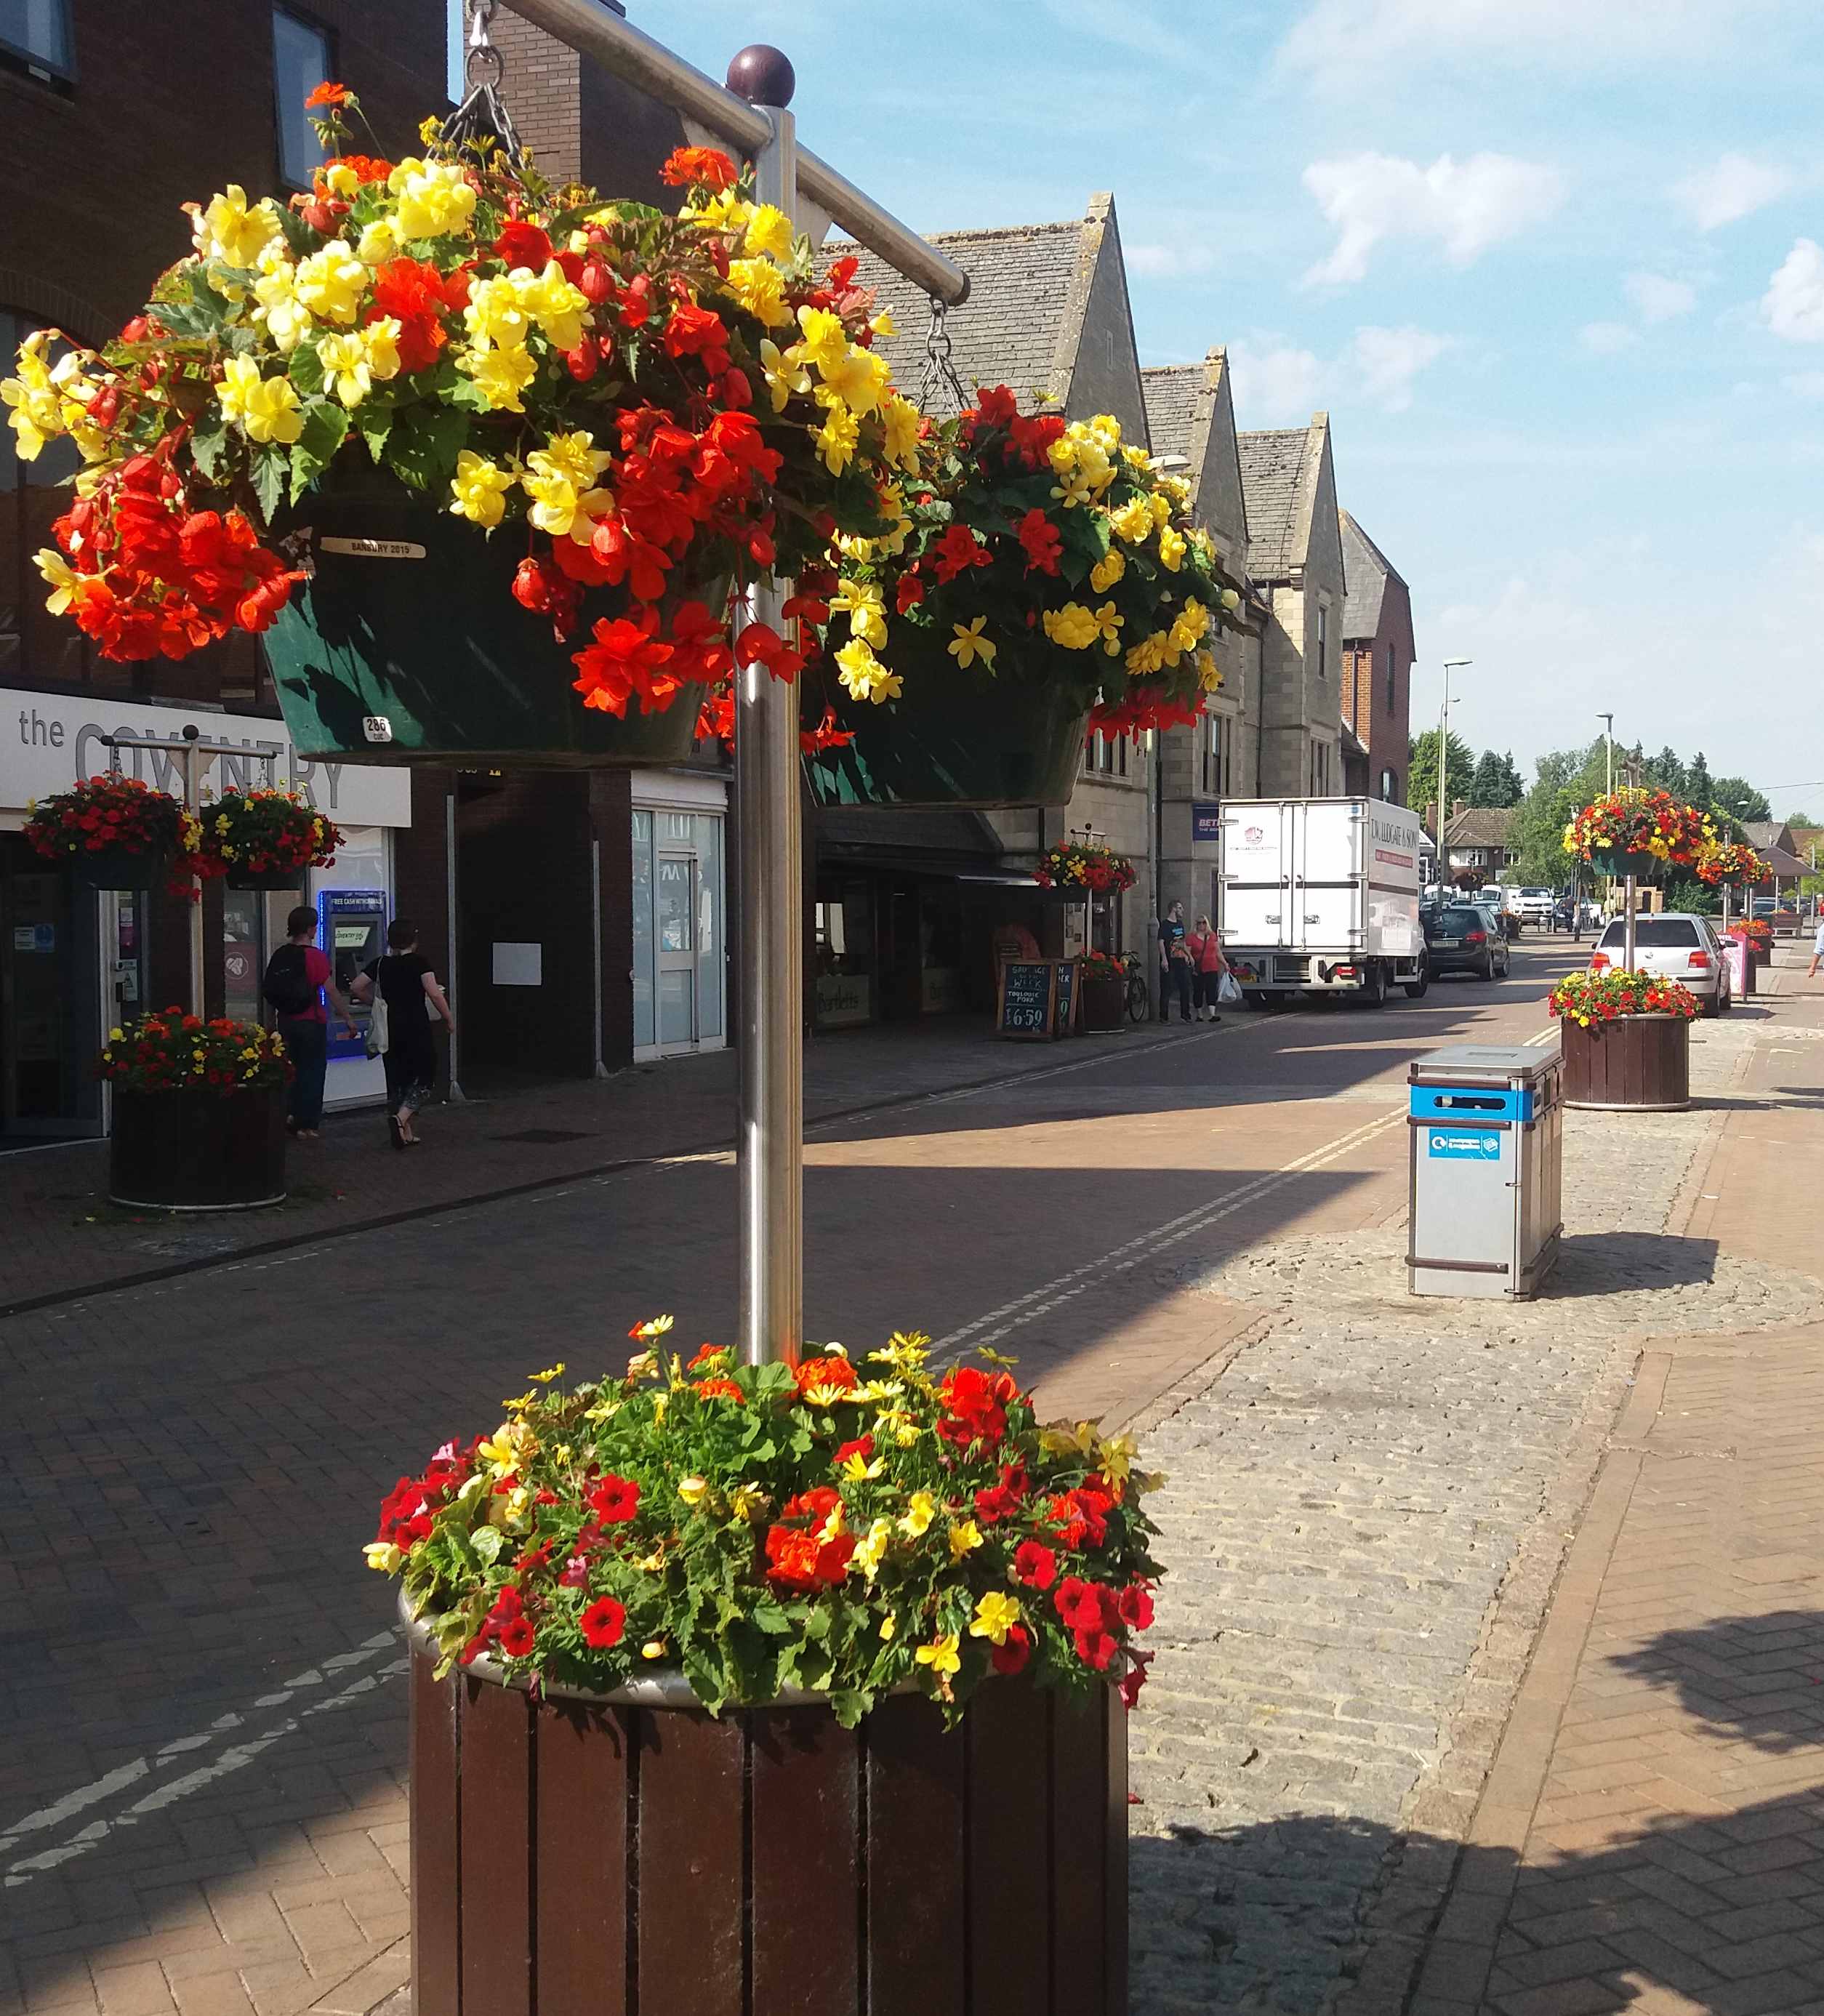 high street with yellow and red flowers